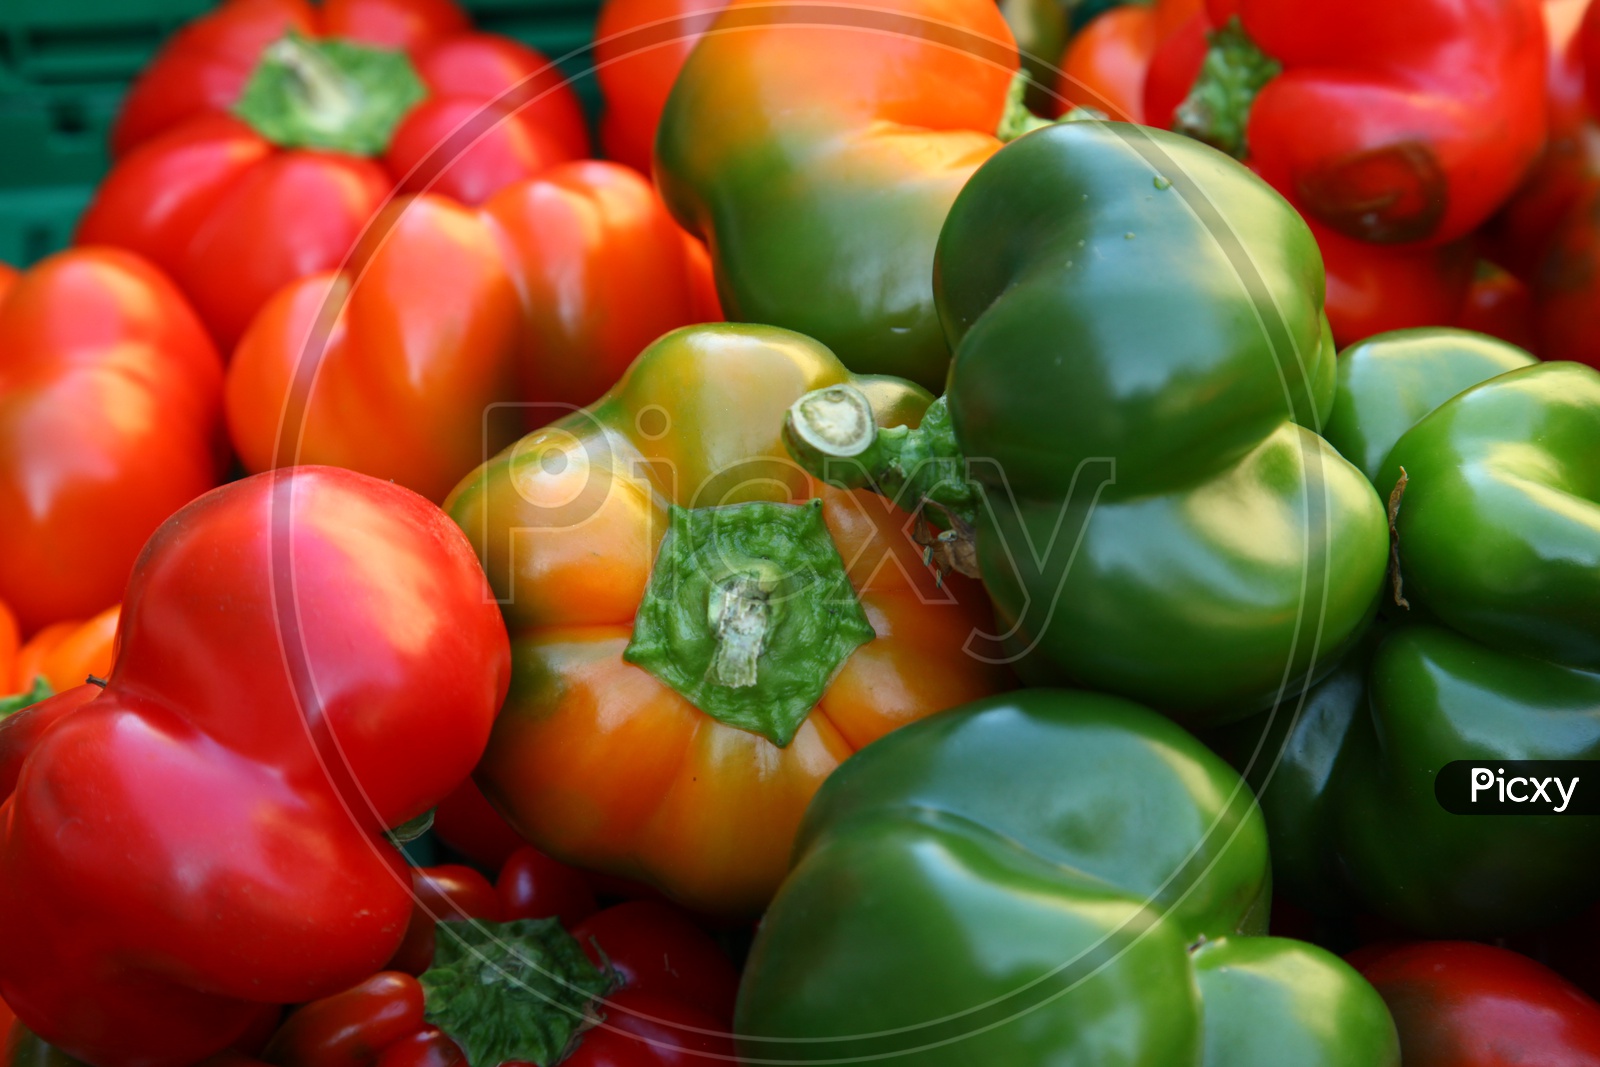 red, green, orange bell peppers